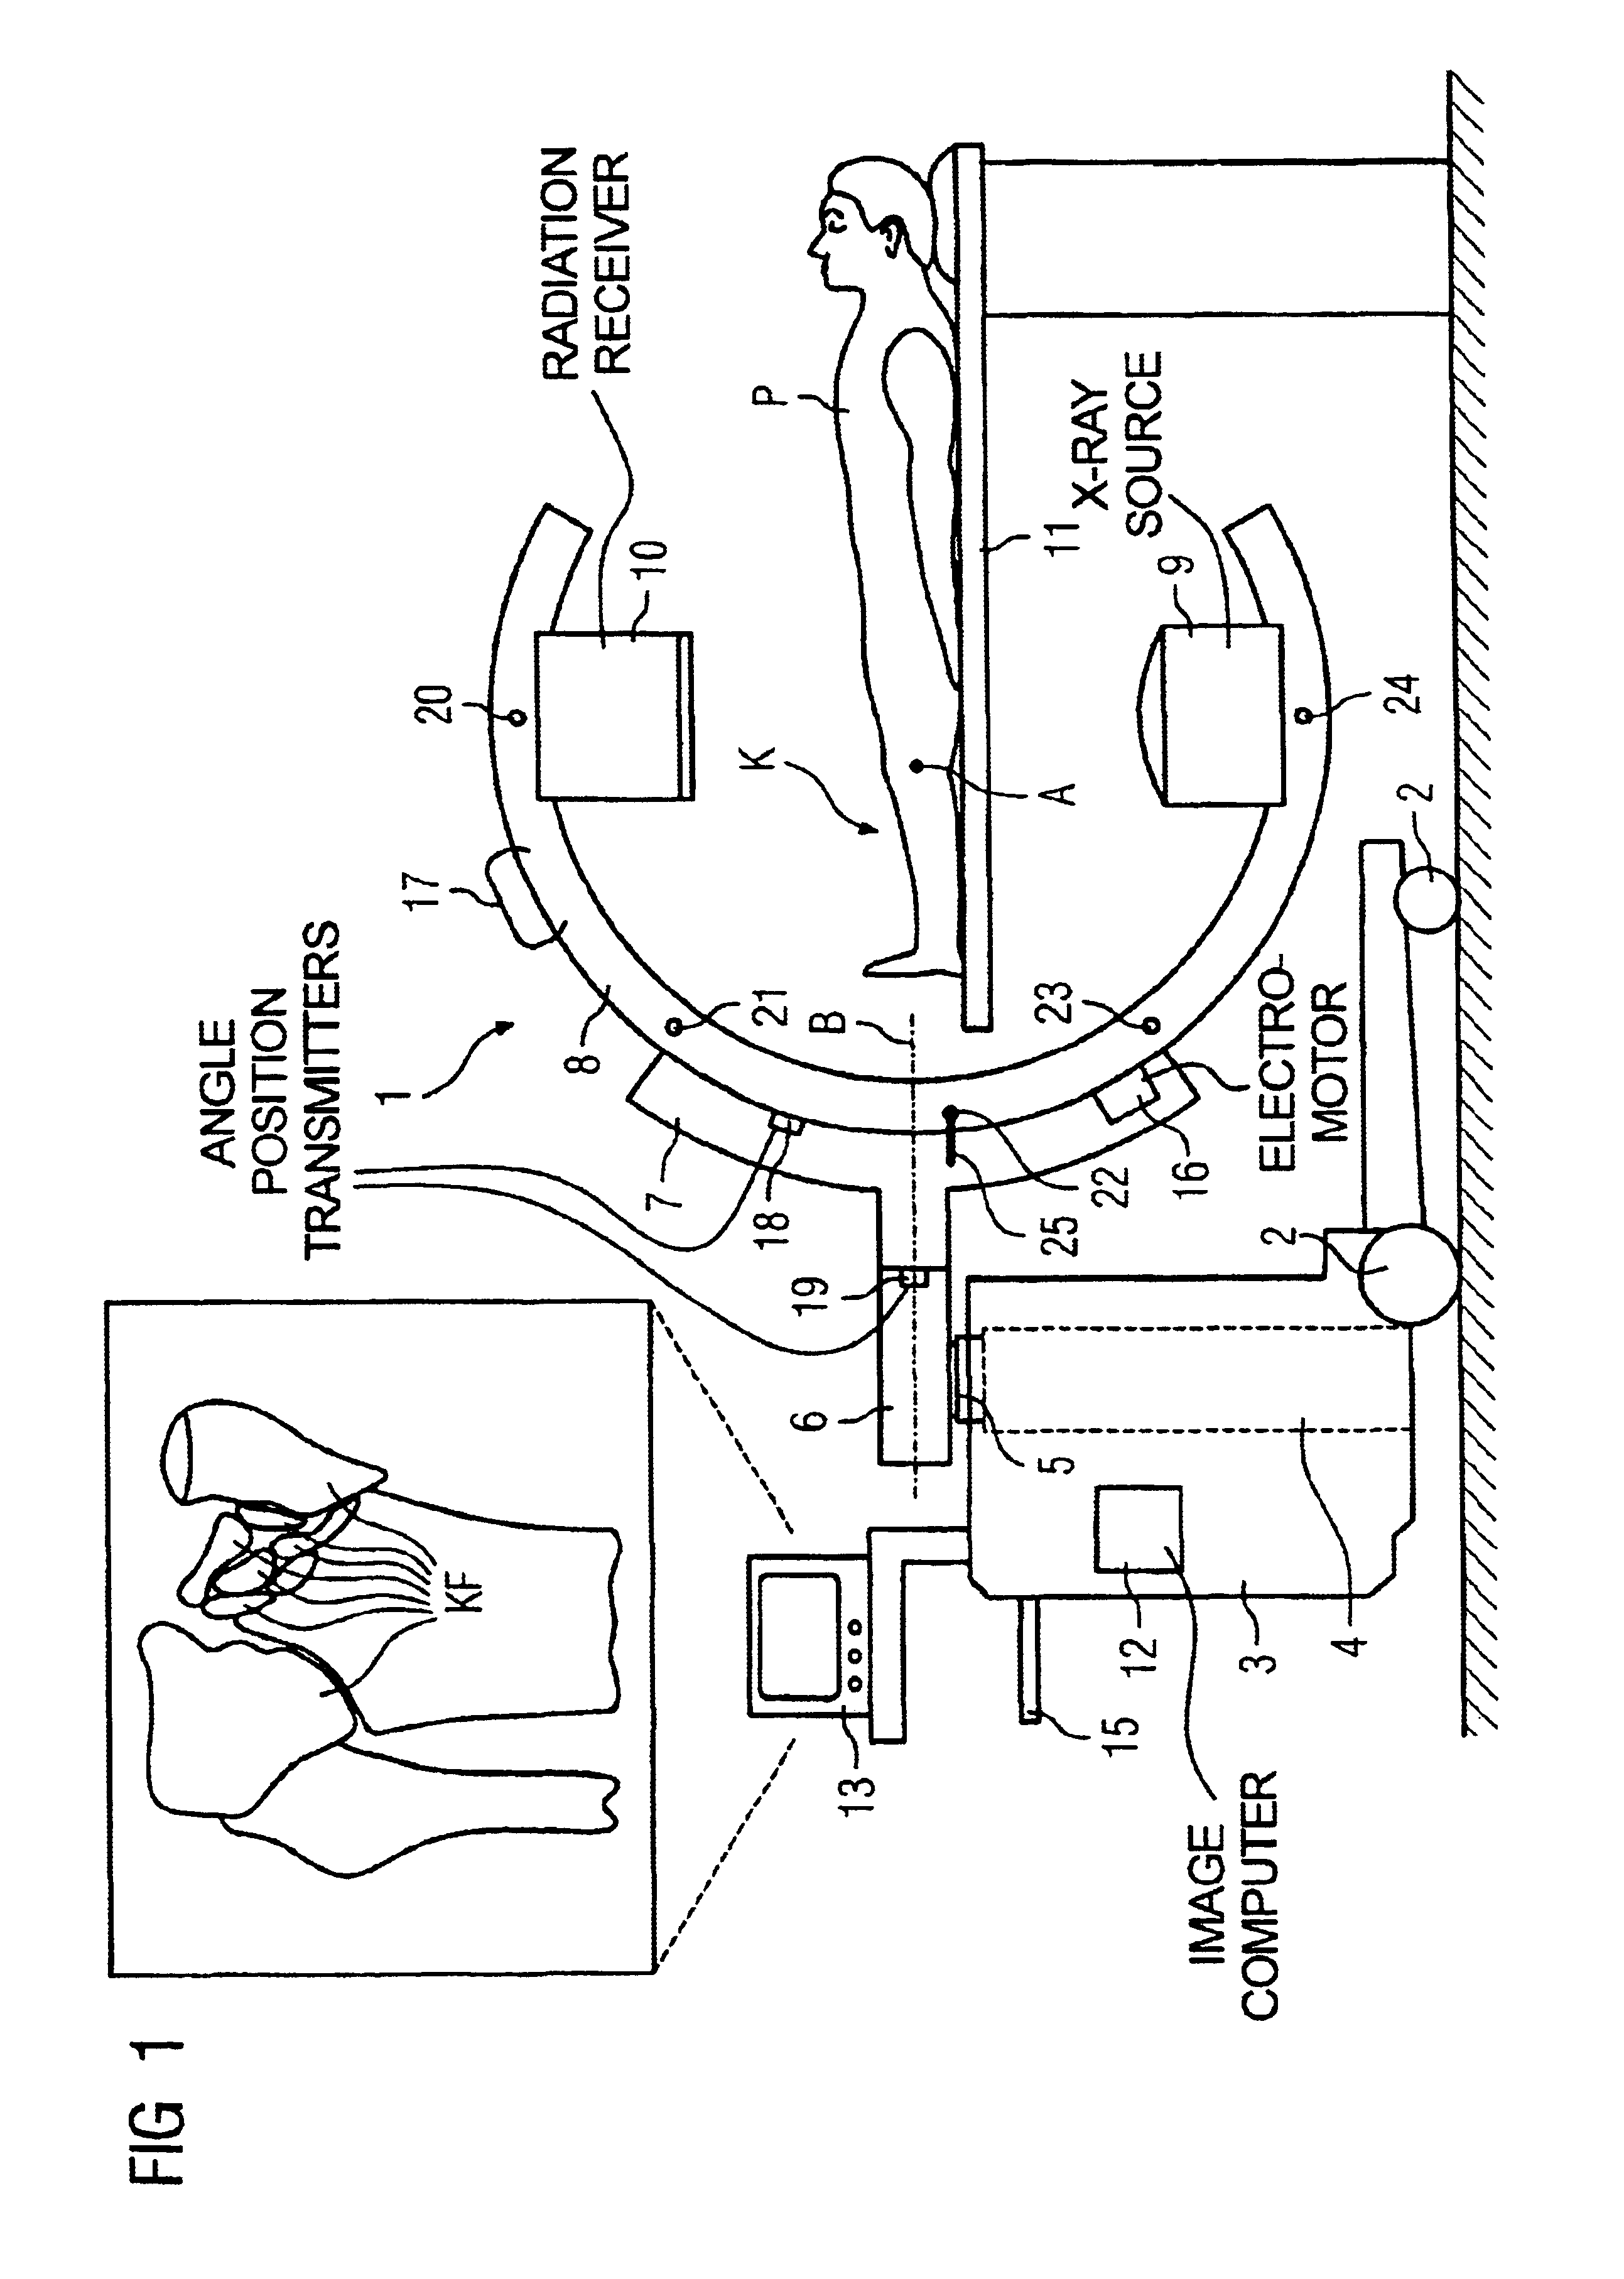 Method for intraoperative generation of an updated volume data set